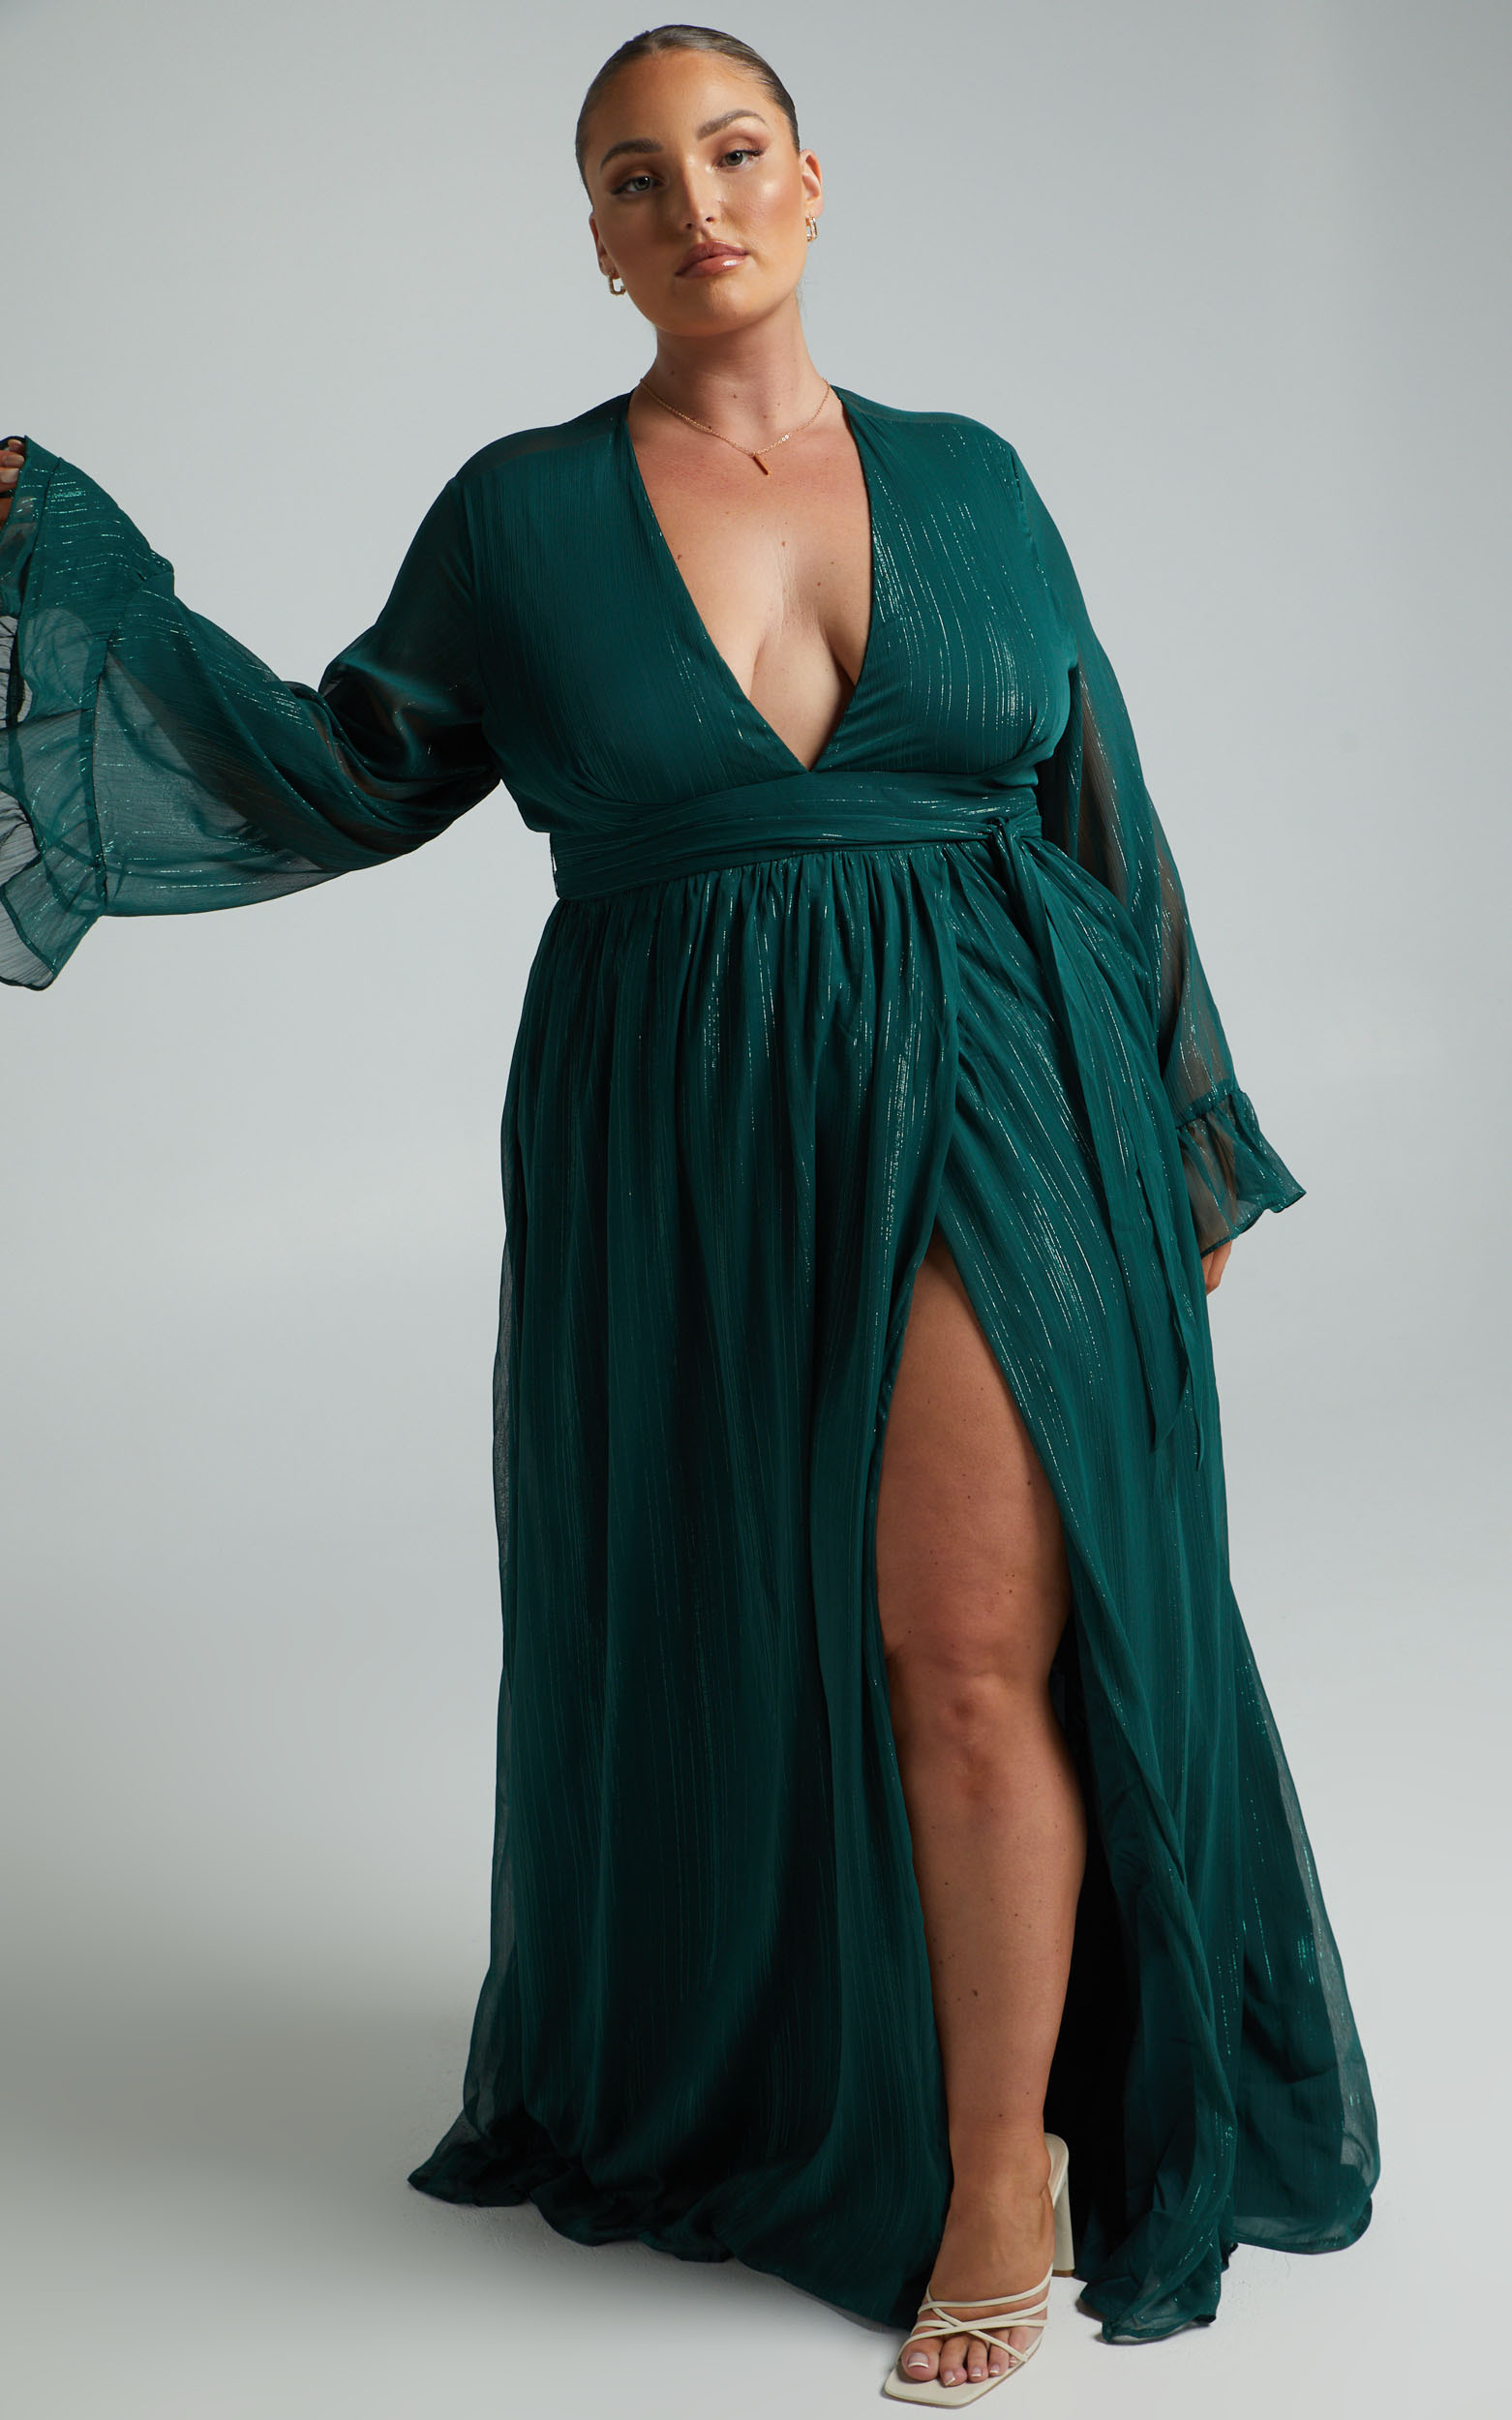 Dangerous Woman Maxi Dress in Emerald - 04, GRN4, hi-res image number null